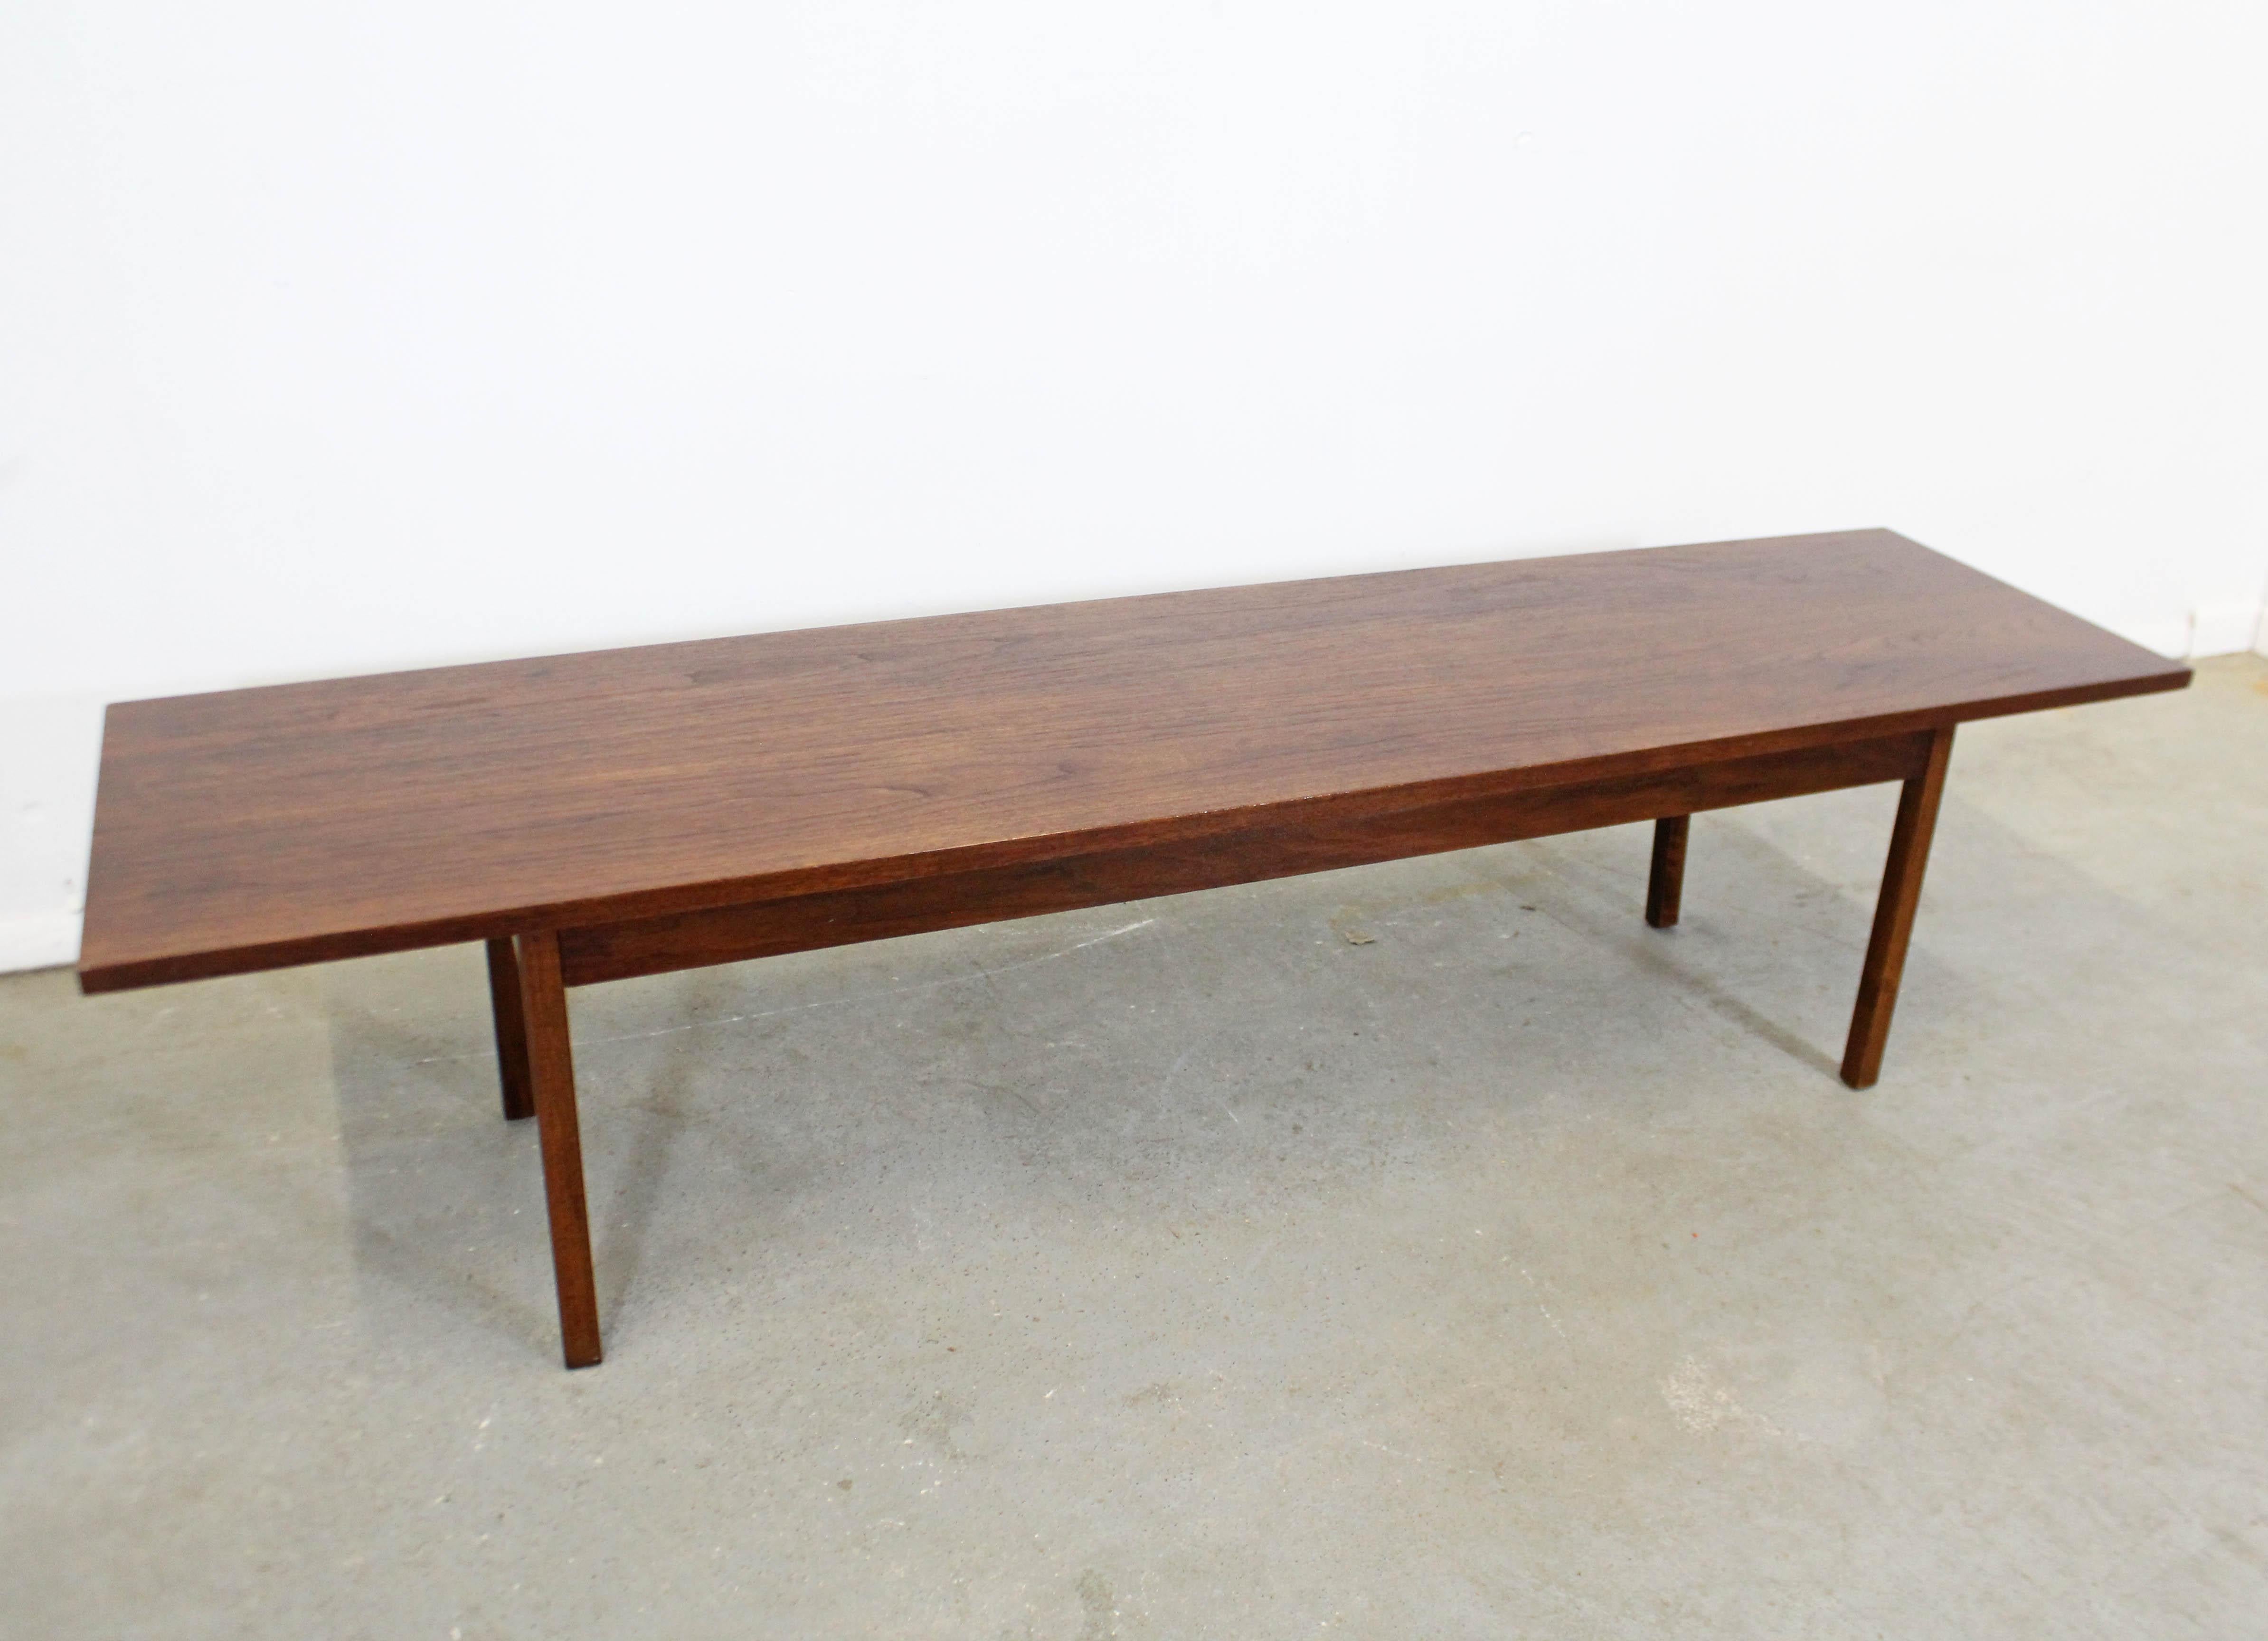 What a find. Offered is a vintage Mid-Century Modern walnut coffee table. It has a nice look and simple lines. Has been refinished and is in good condition with minor surface wear/scratches. It is structurally sound and stabile. It is not